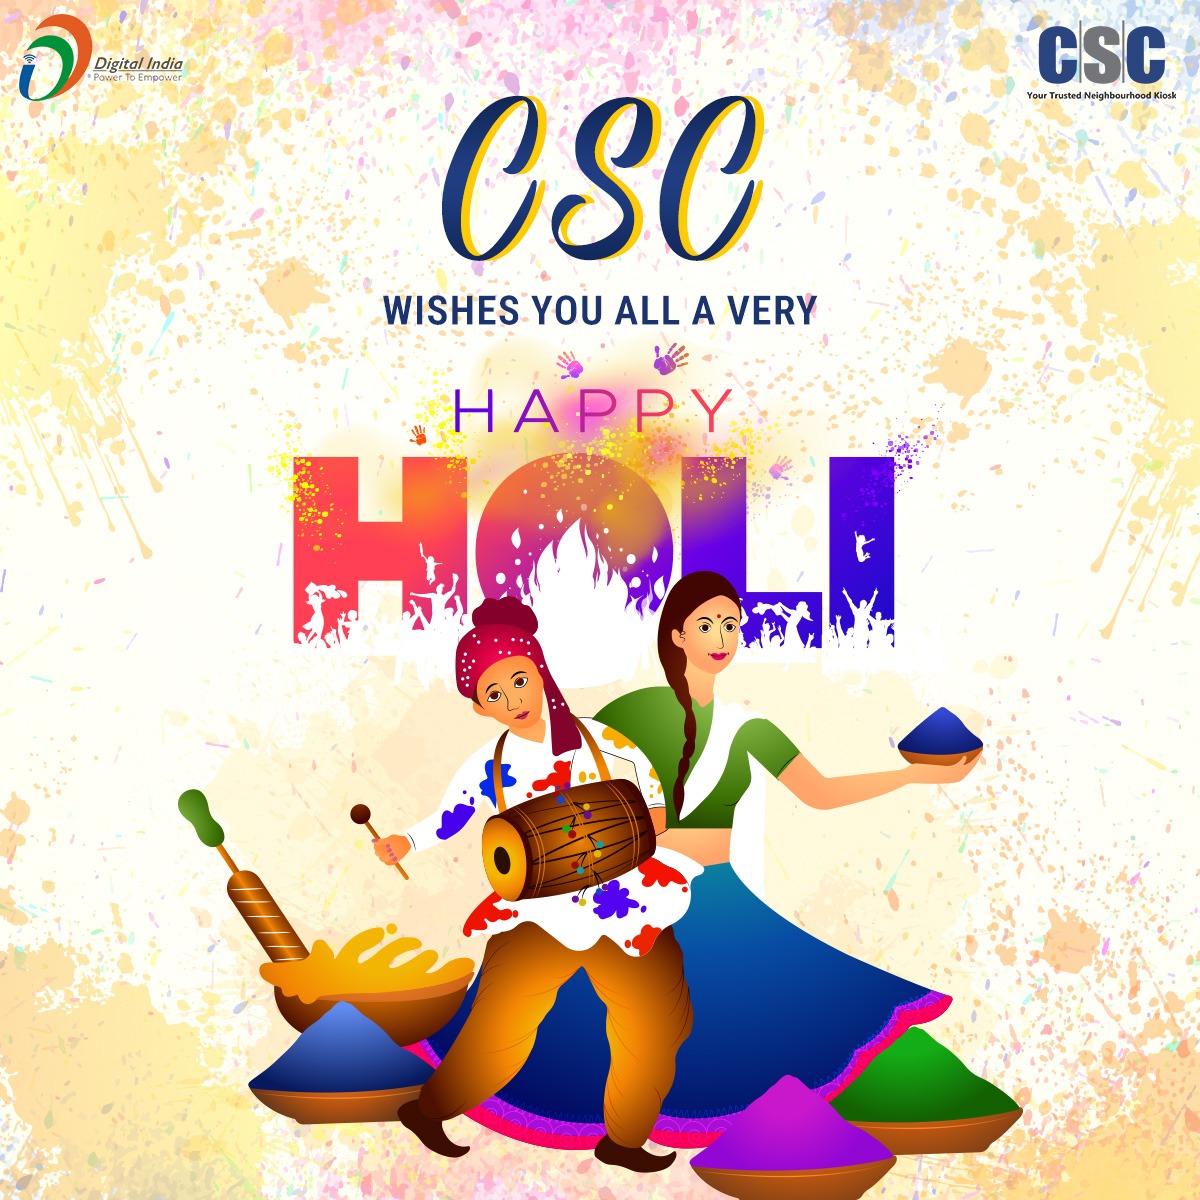 This #Holi, May your life be blessed with a beautiful rainbow of colors. May you be bestowed with success and prosperity. #CSC wishes you all a #HappyHoli to you and your family. #HappyHoli2024 #Holi2024 #HoliCelebration #HoliSpecial #CSCHoli #DigitalIndia #CSCHoliSpecial